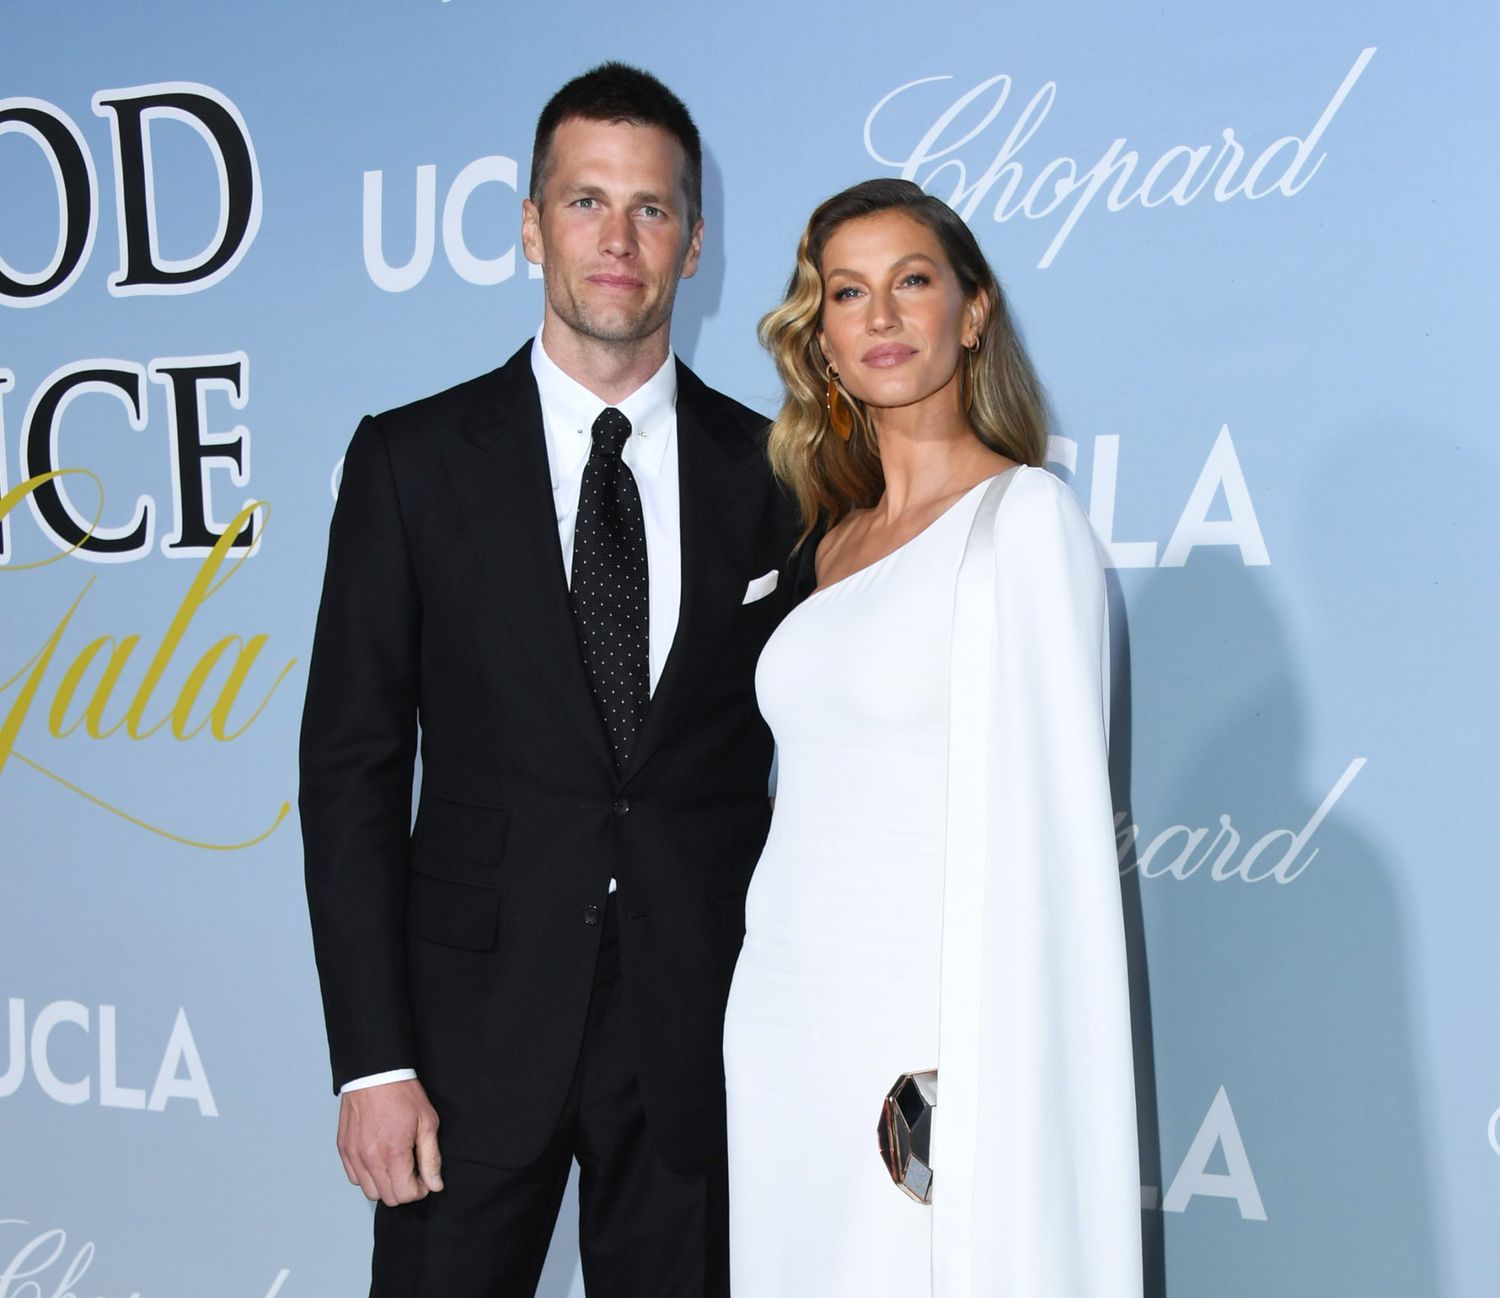 Tom Brady and Gisele Bundchen at the 2019 Hollywood For Science Gala